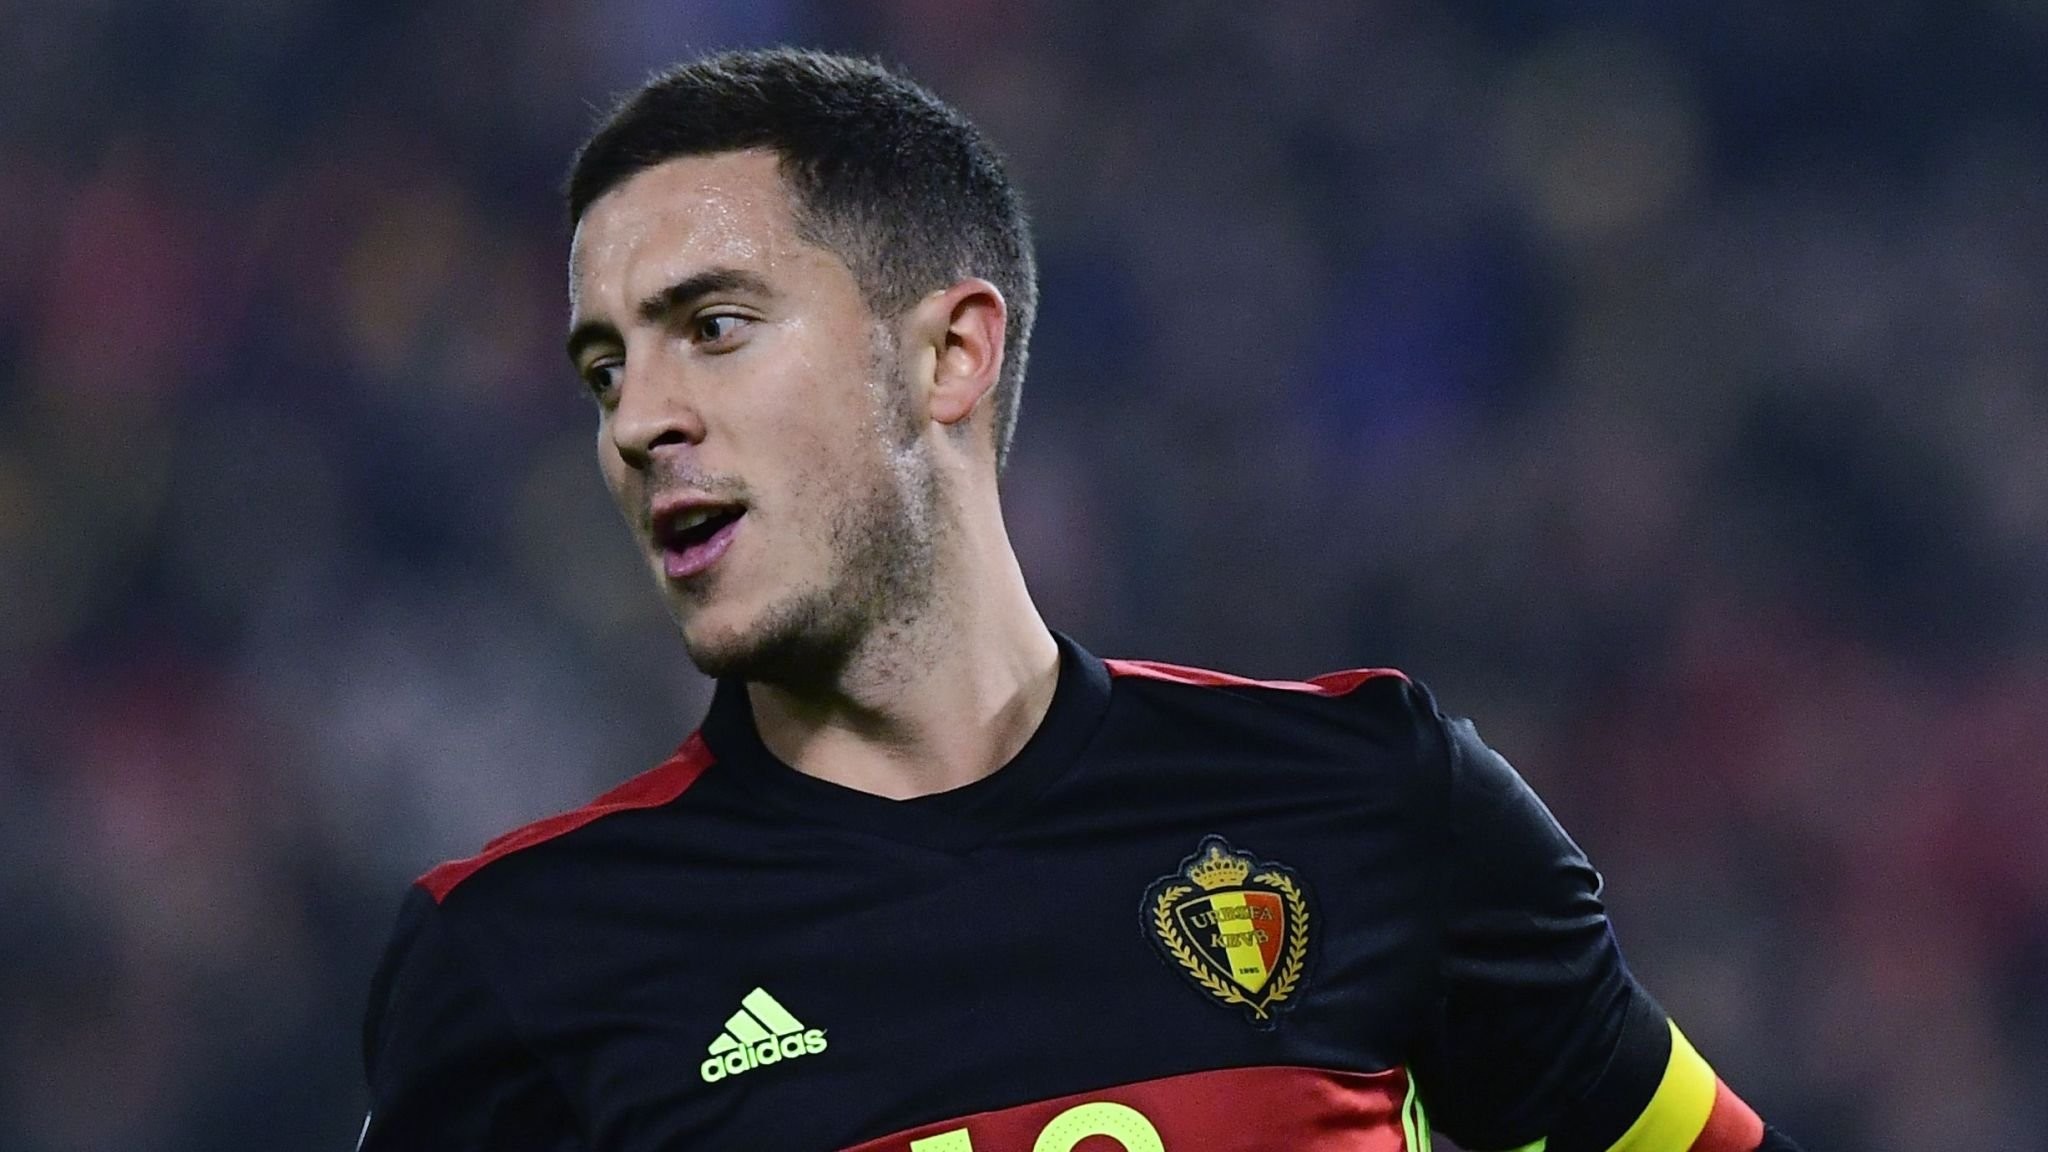 2048x1152 Belgium are through to the 2018 World Cup ð§ðª Congratulations to Eden  Hazard, Thibaut Courtois and Michy Batshuayi! Belgium are the 6th team to  reach the ...